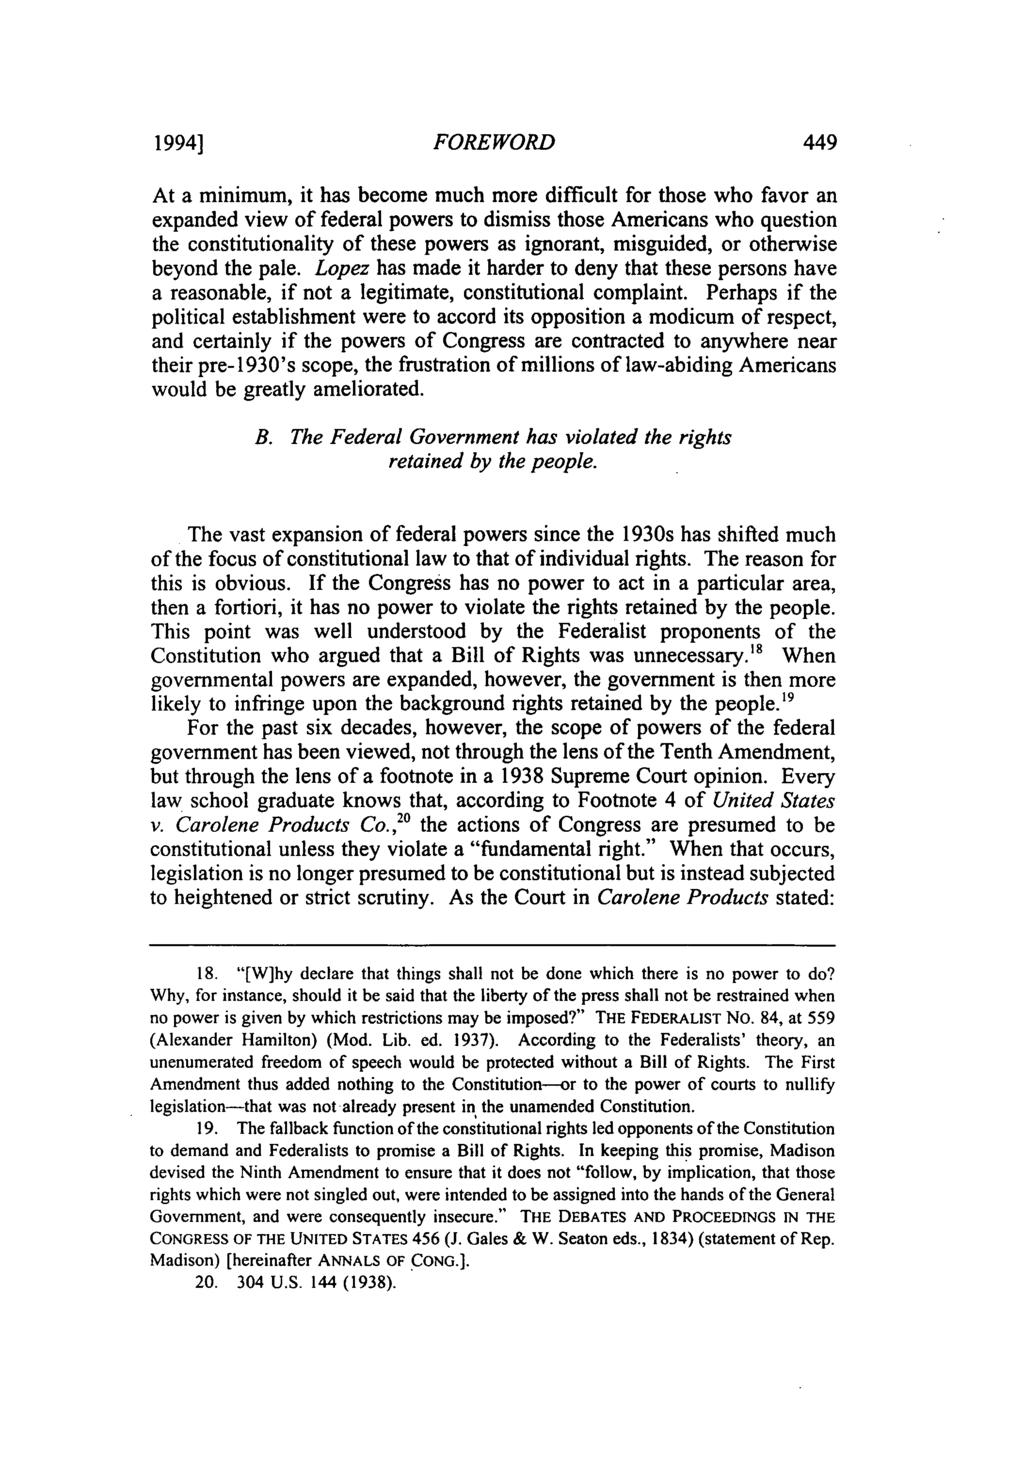 1994] FOREWORD At a minimum, it has become much more difficult for those who favor an expanded view of federal powers to dismiss those Americans who question the constitutionality of these powers as